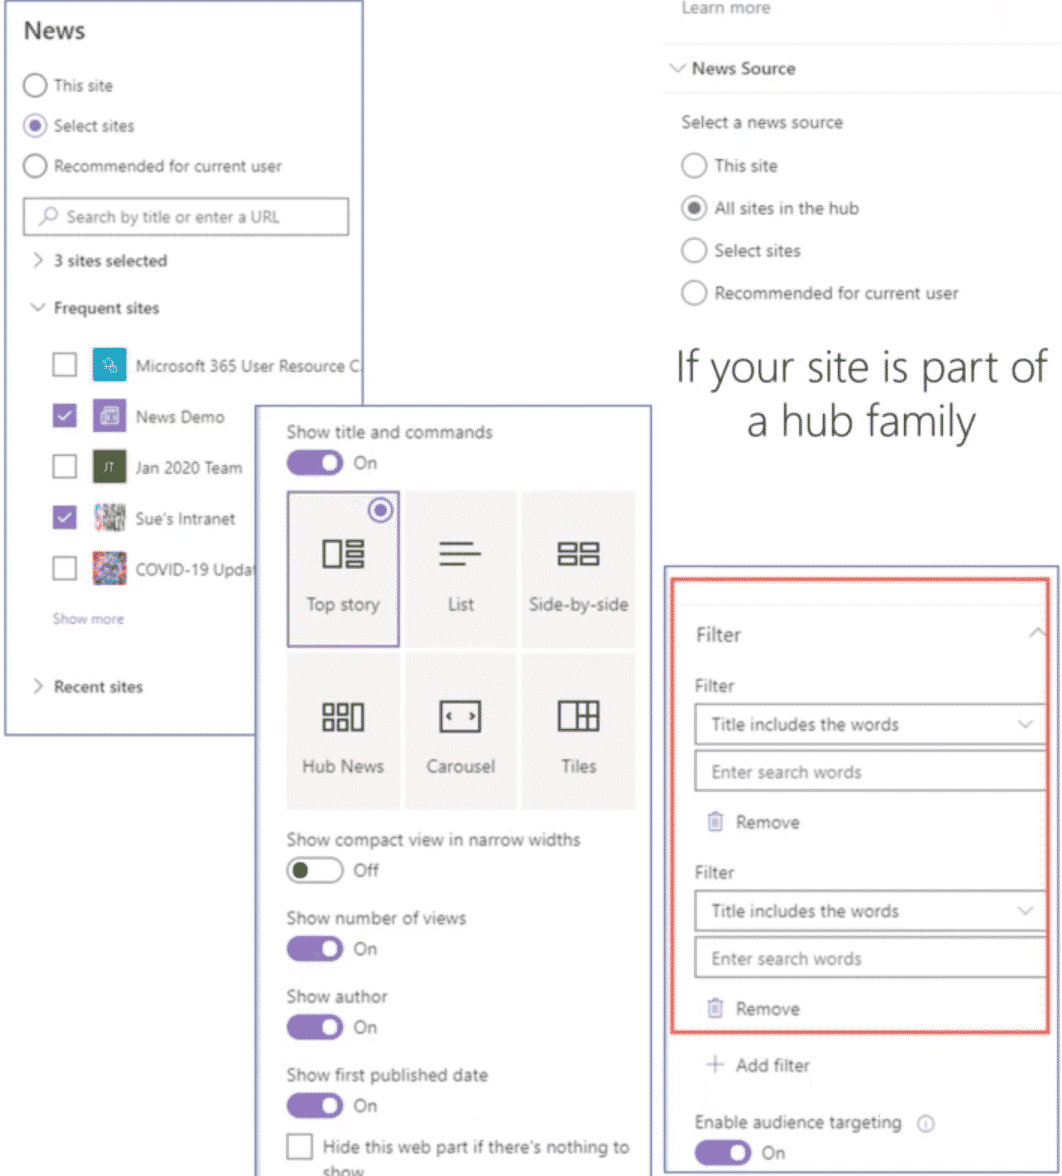 SharePoint Online News - Select New Source